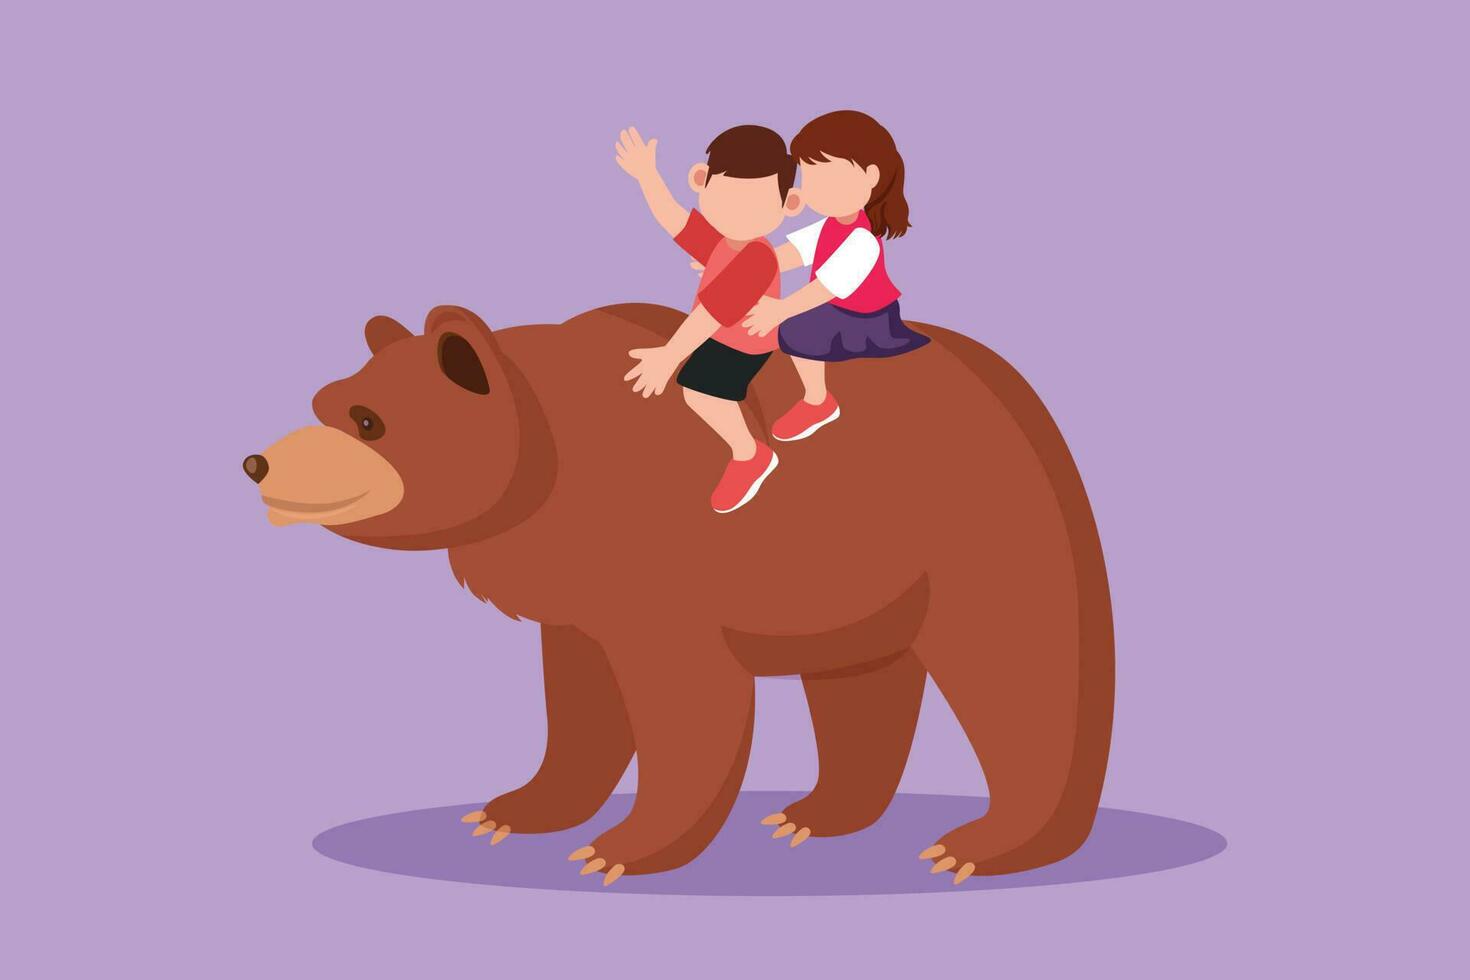 Graphic flat design drawing little boy and girl riding brown grizzly bear together. Children sitting on back bear at circus event. Kids learning to ride beast animal. Cartoon style vector illustration